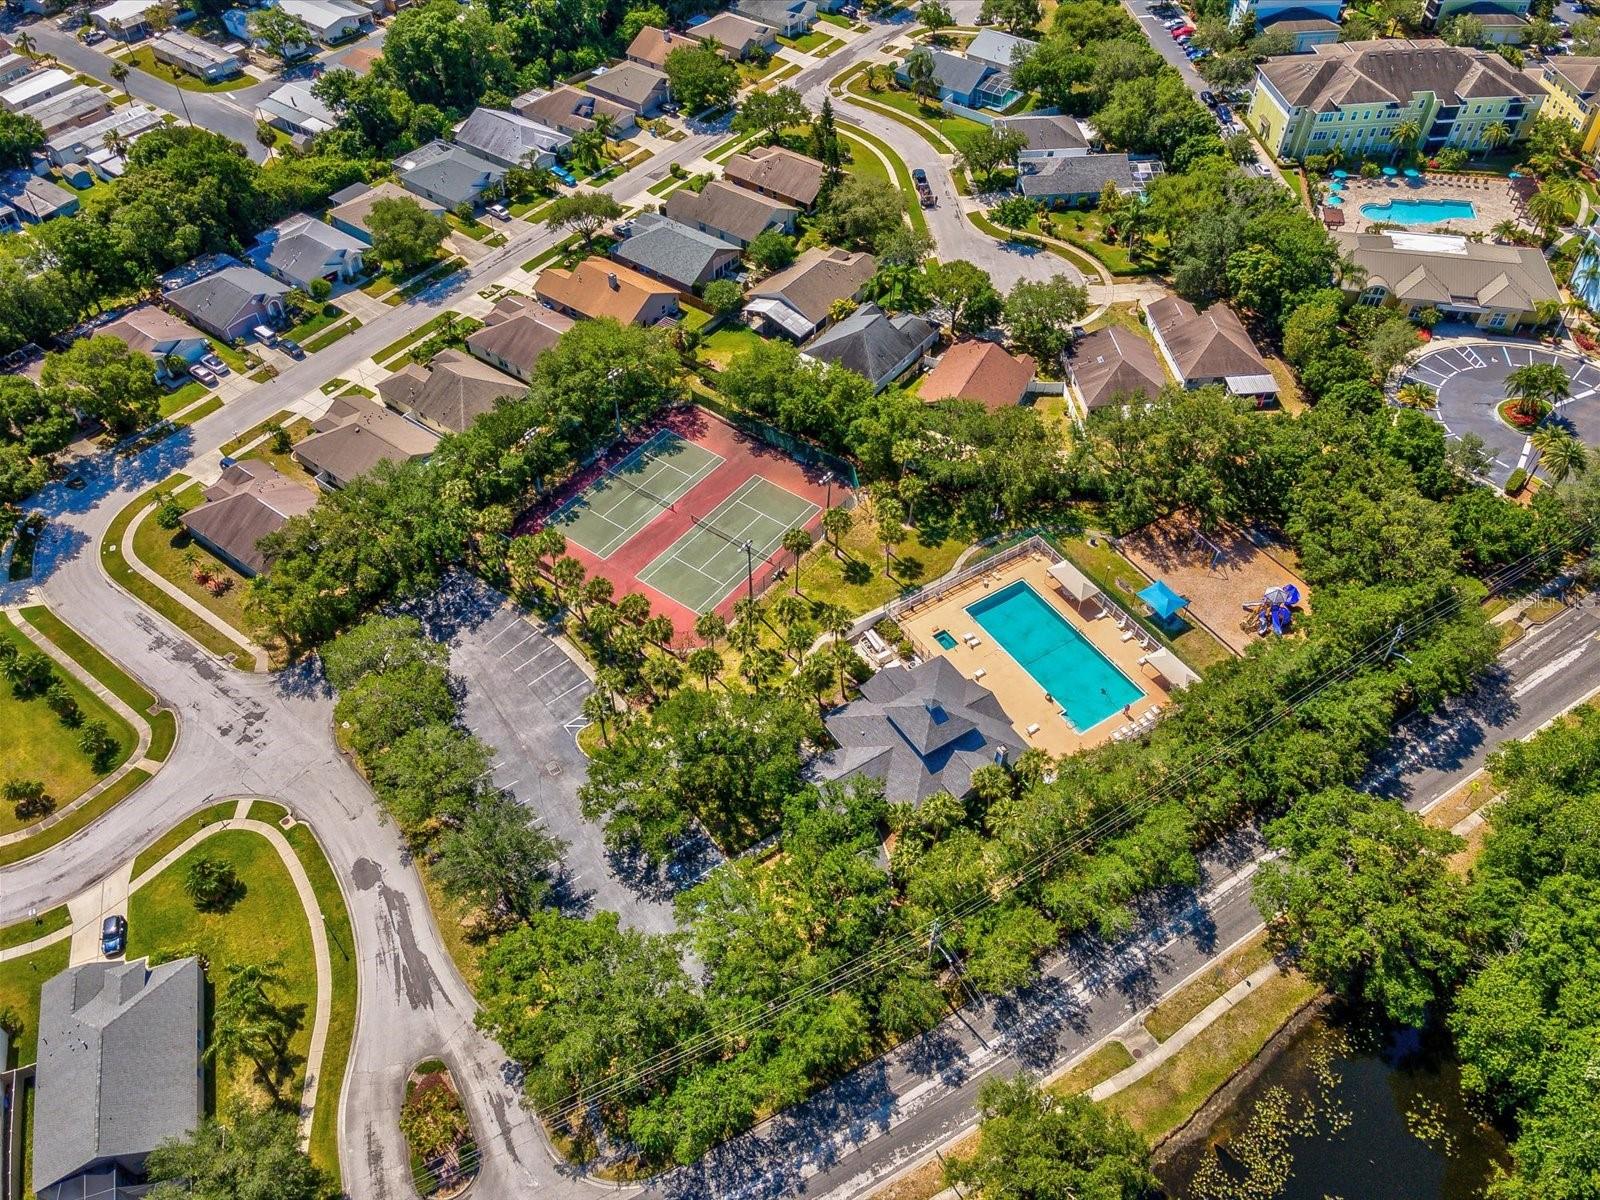 aerial shot of amenities for the community